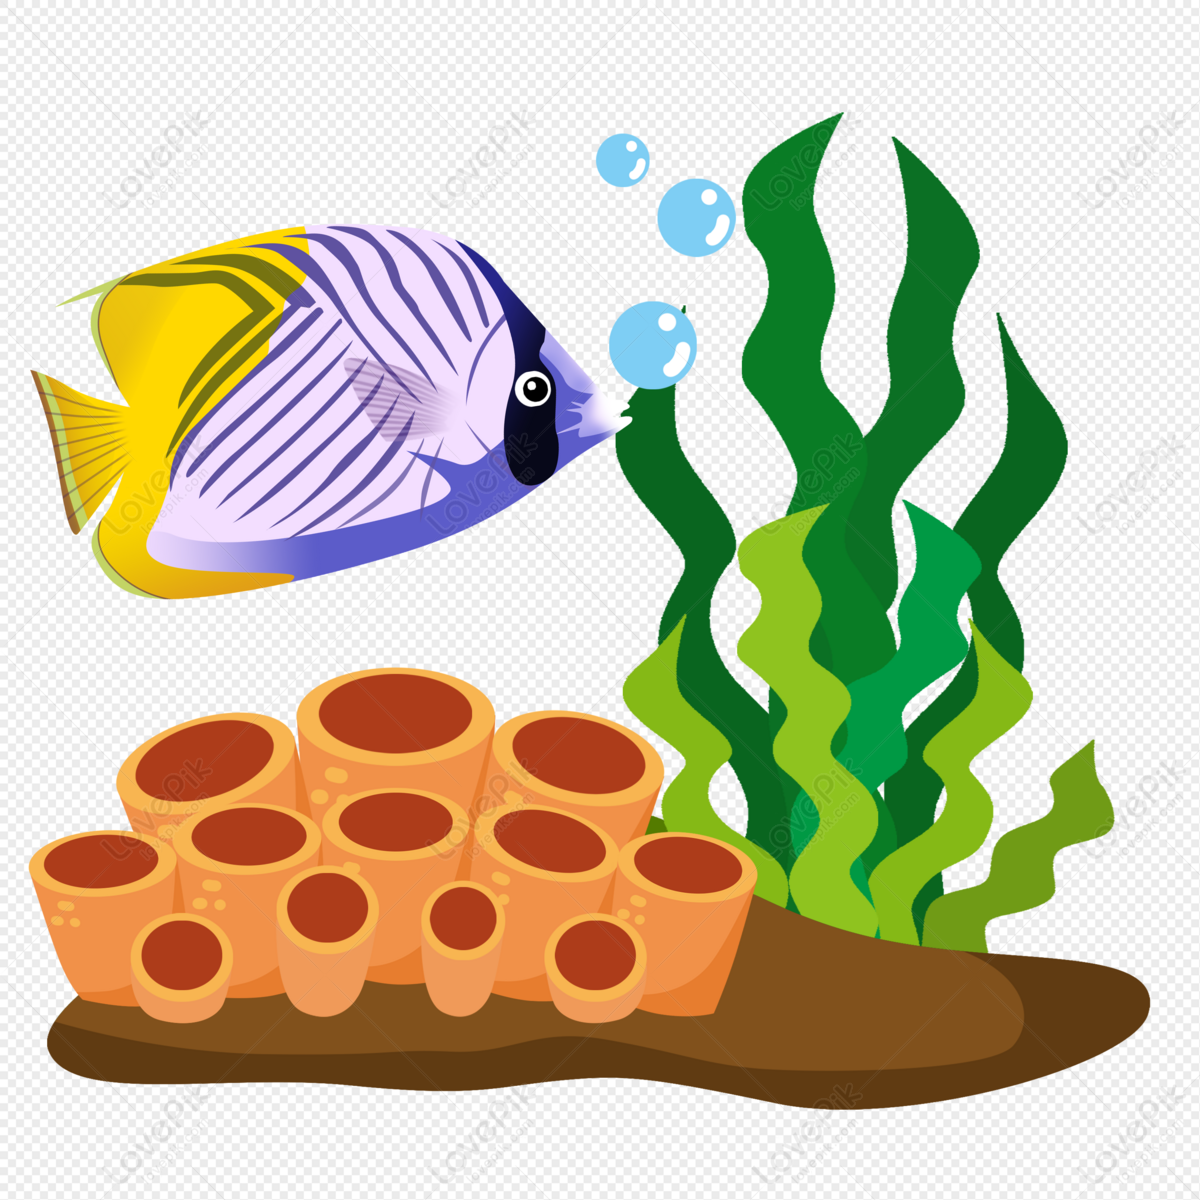 Cartoon Tropical Fish Elements PNG Image Free Download And Clipart Image  For Free Download - Lovepik | 401389421